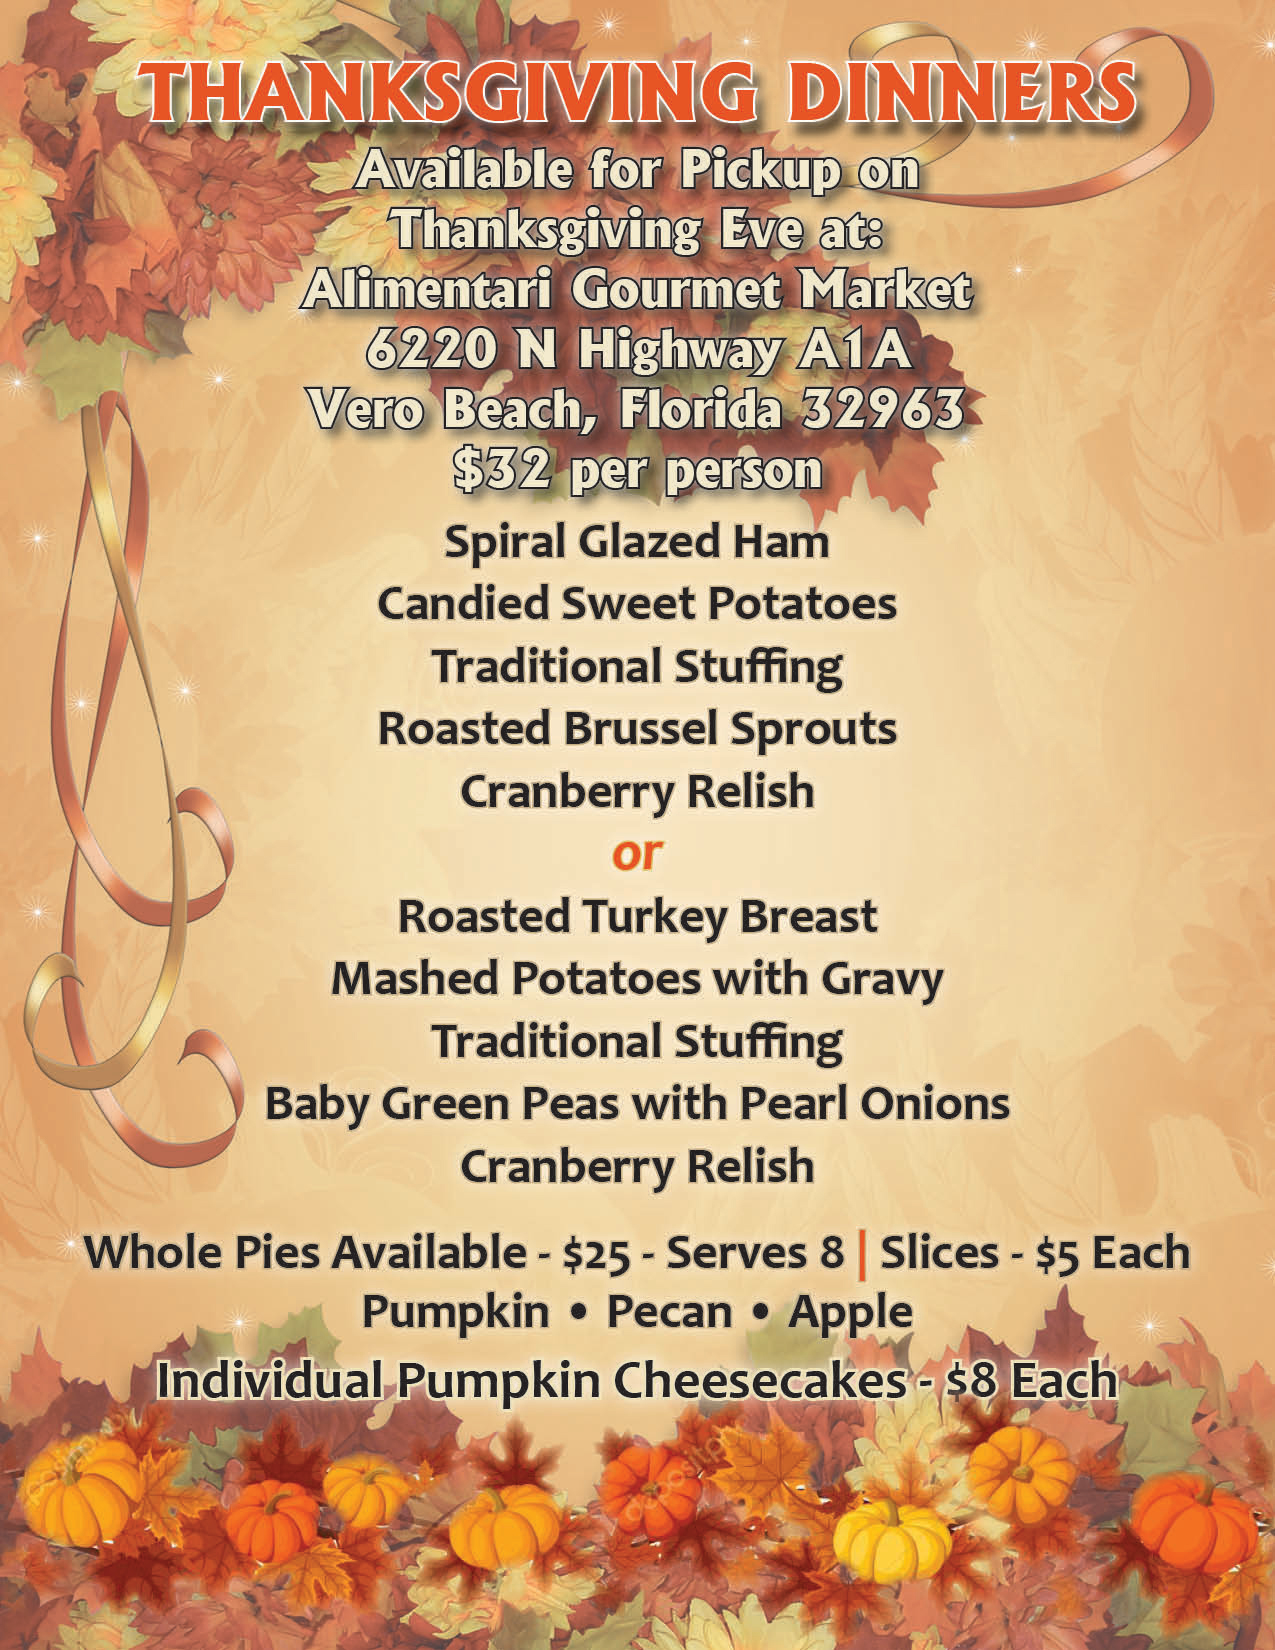 Alimentari Gourmet Market Thanksgiving Dinners available for Pickup on 
													  Thanksgiving Eve $32 per person